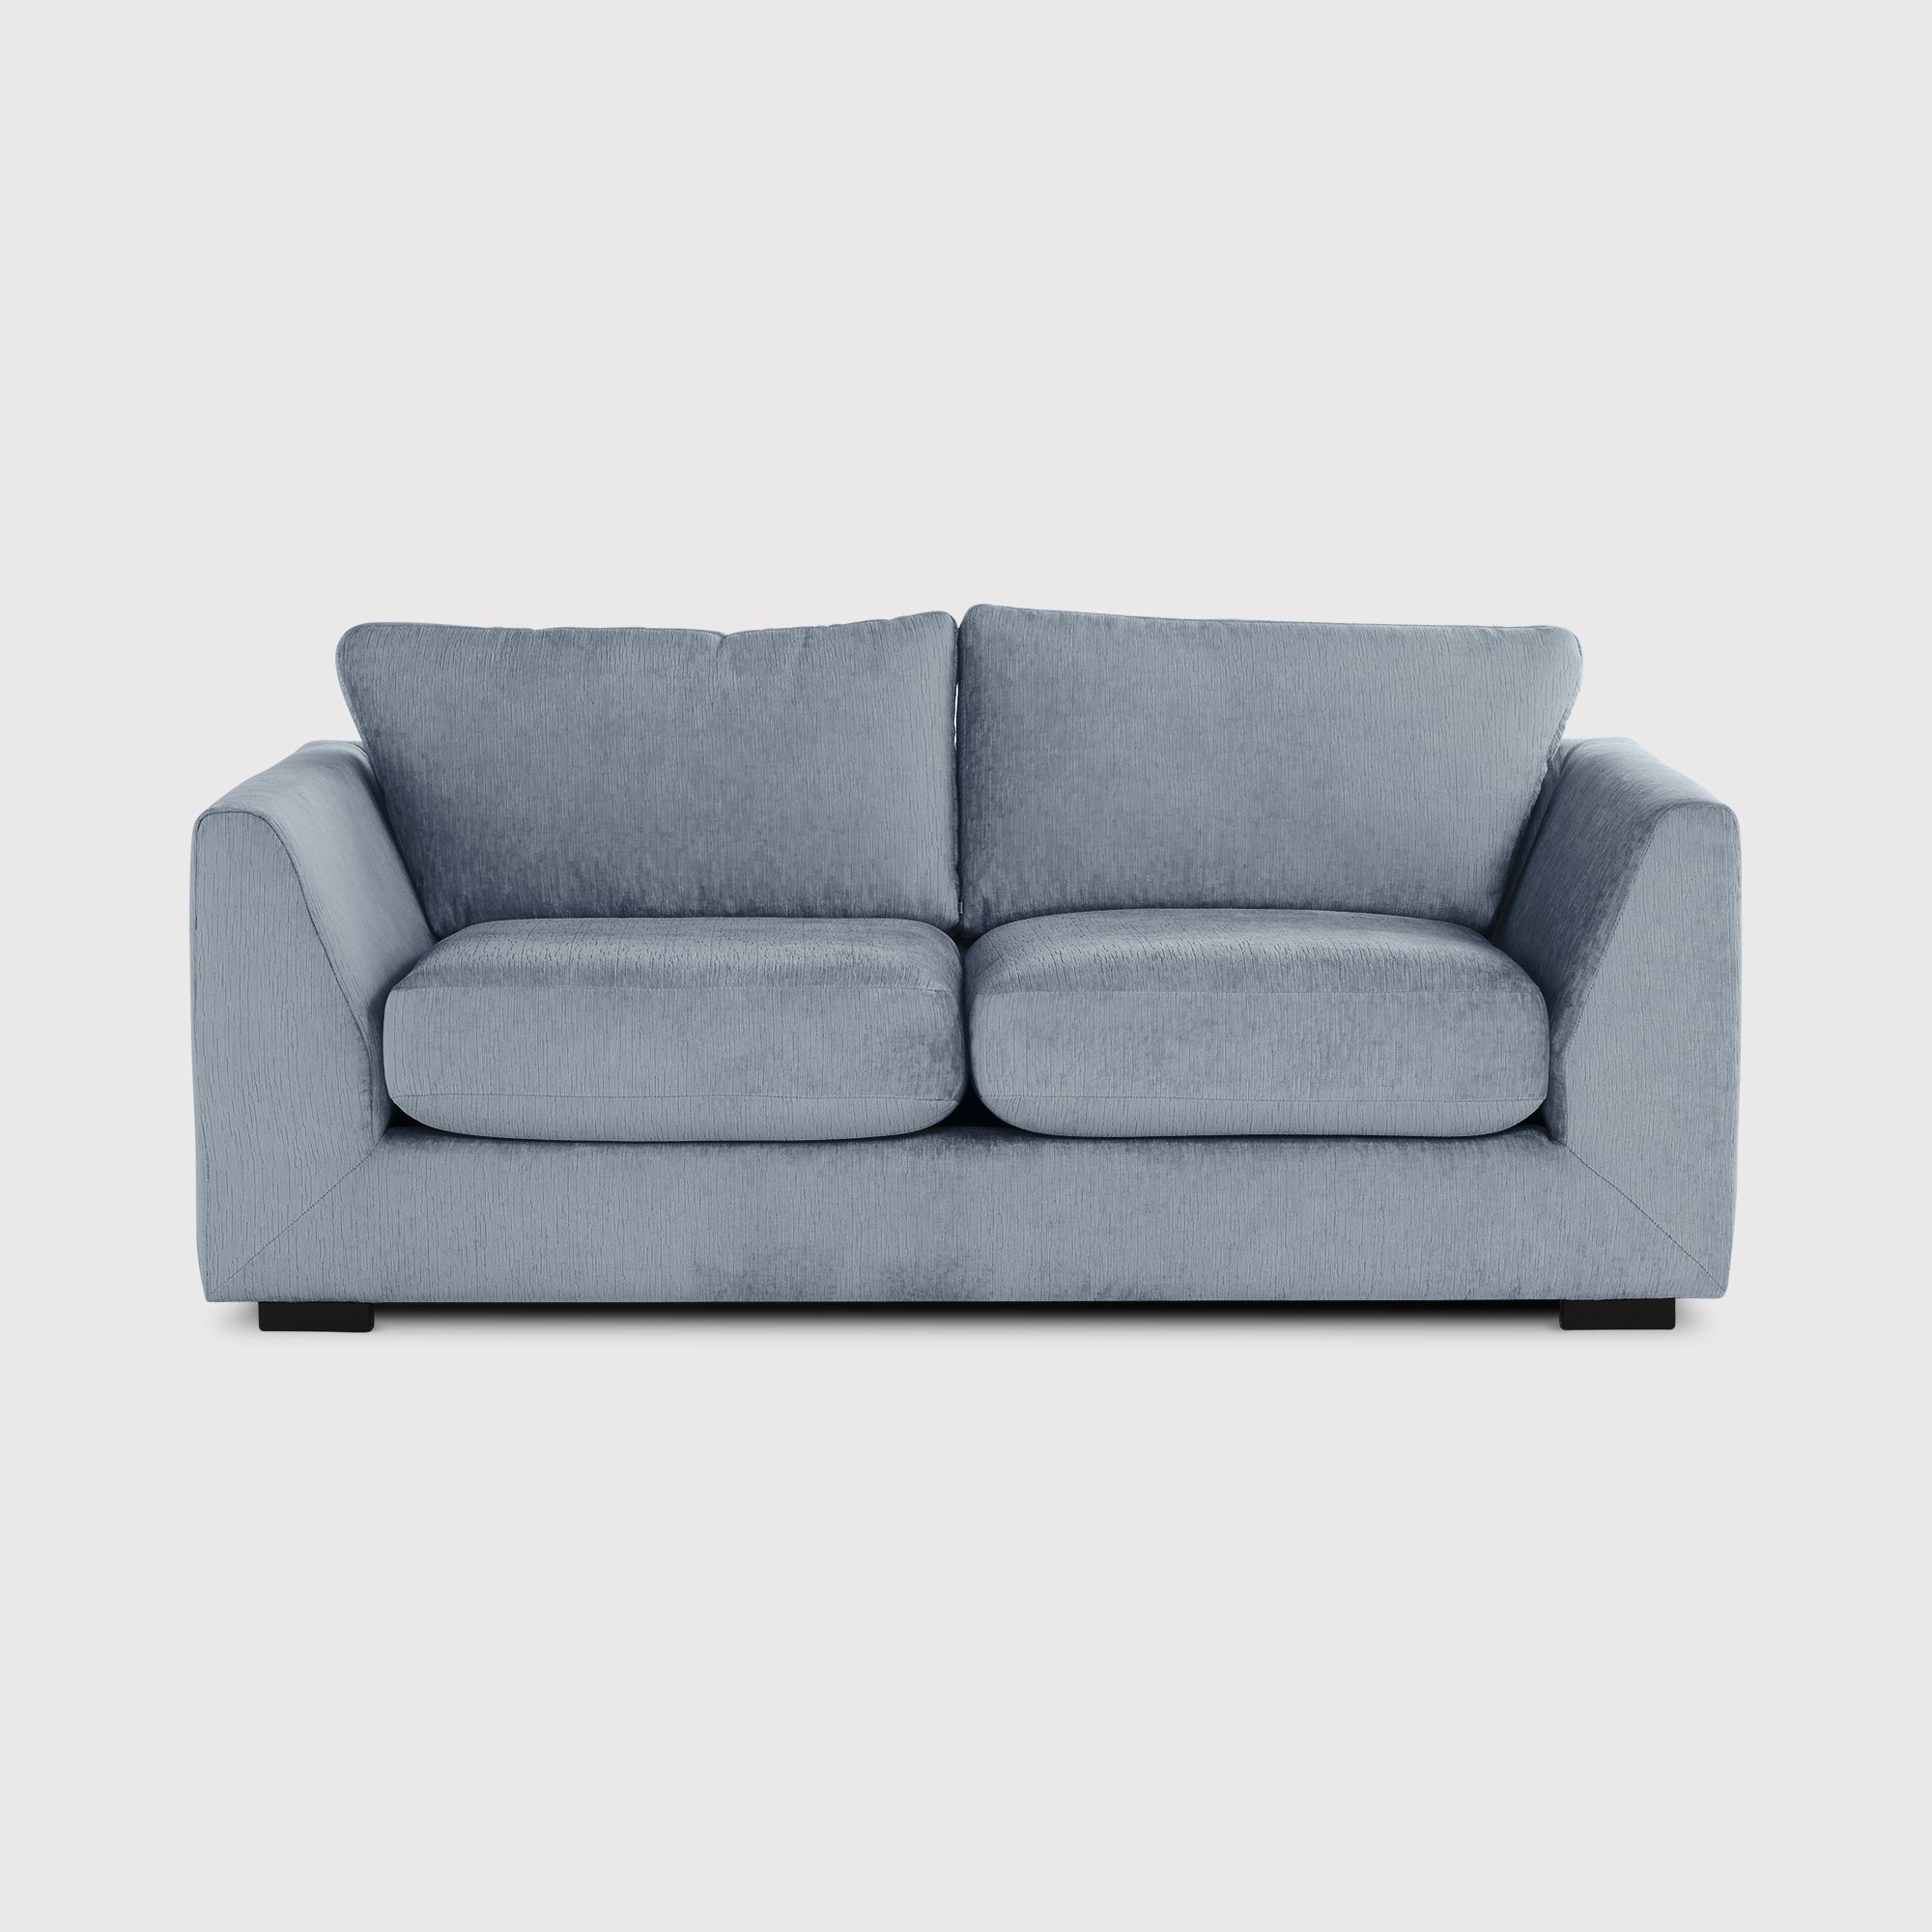 Melby 2 Seater Sofa | Barker & Stonehouse